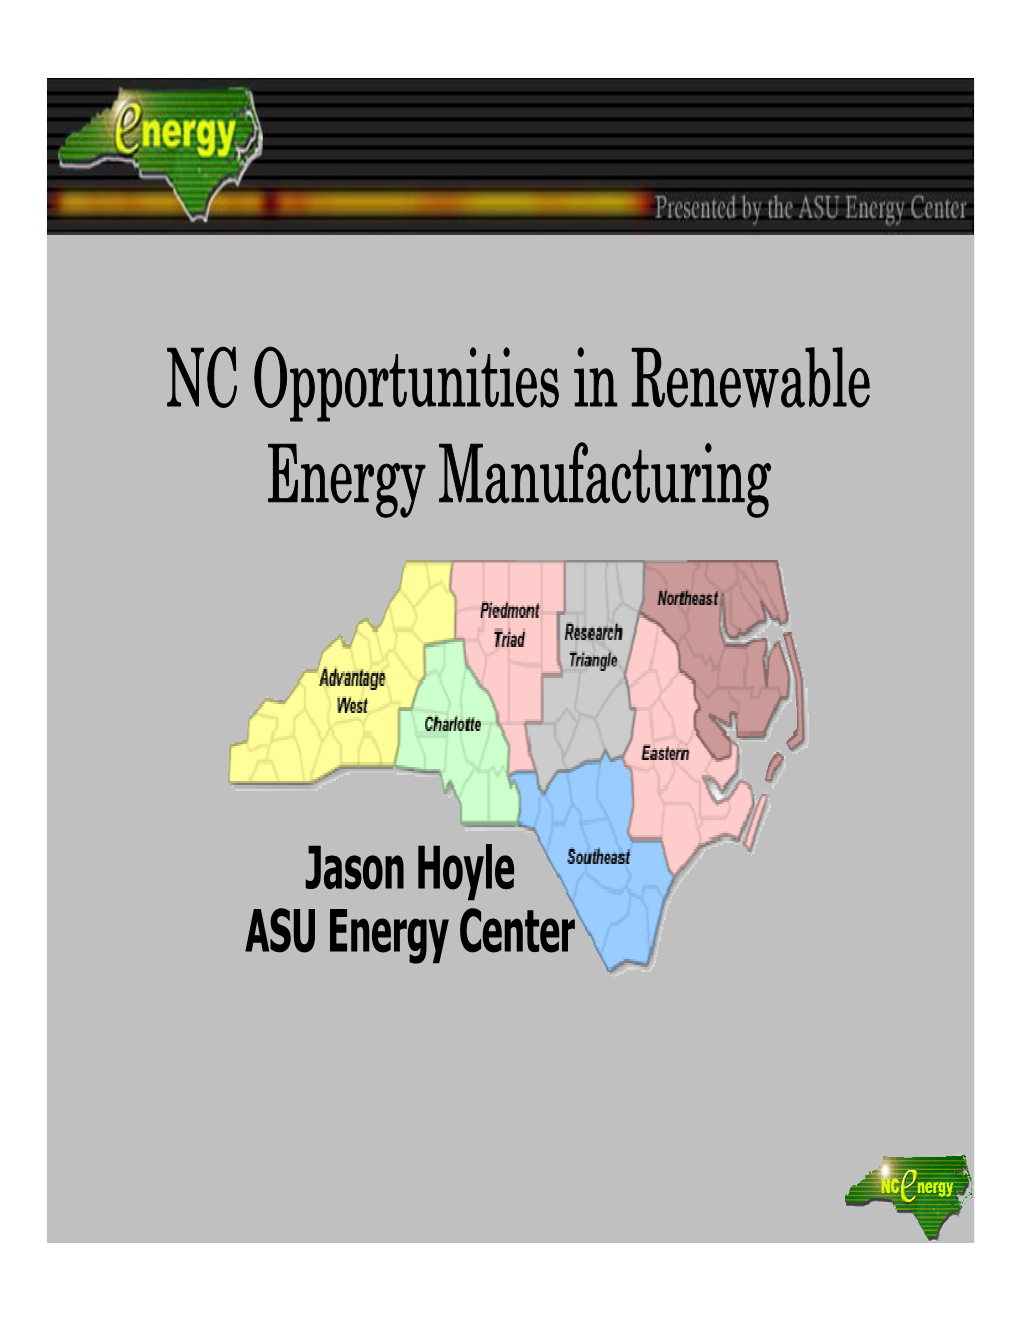 NC Opportunities in Renewable Energy Manufacturing